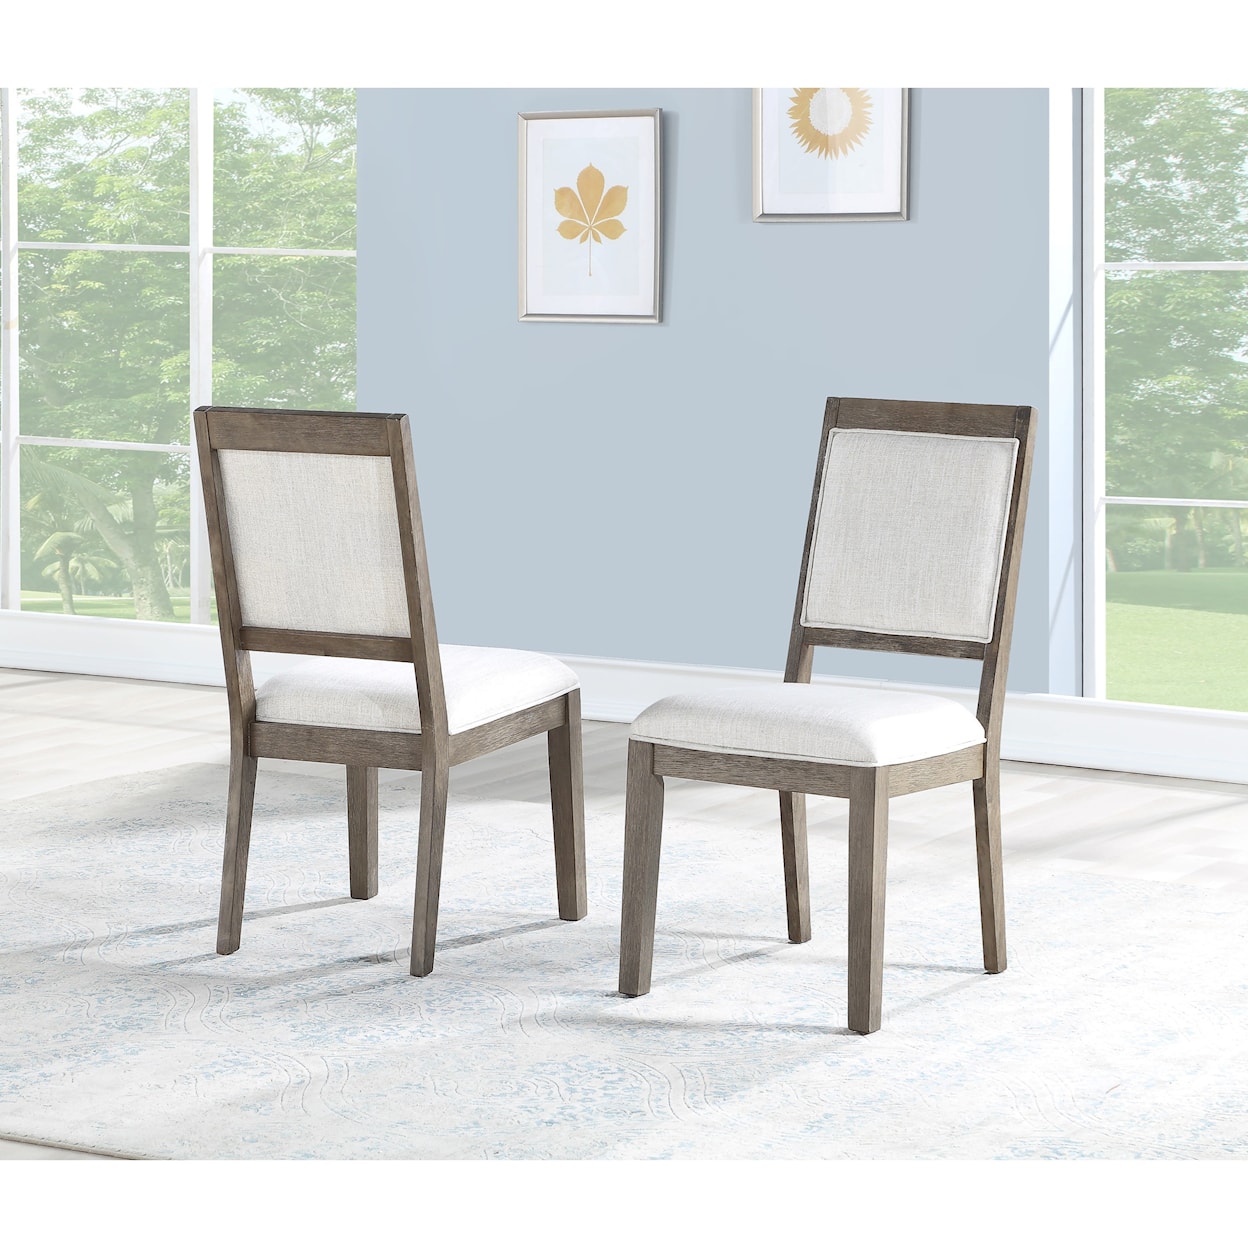 Steve Silver Wisteria Wisteria 5-Piece Table and Chair Set